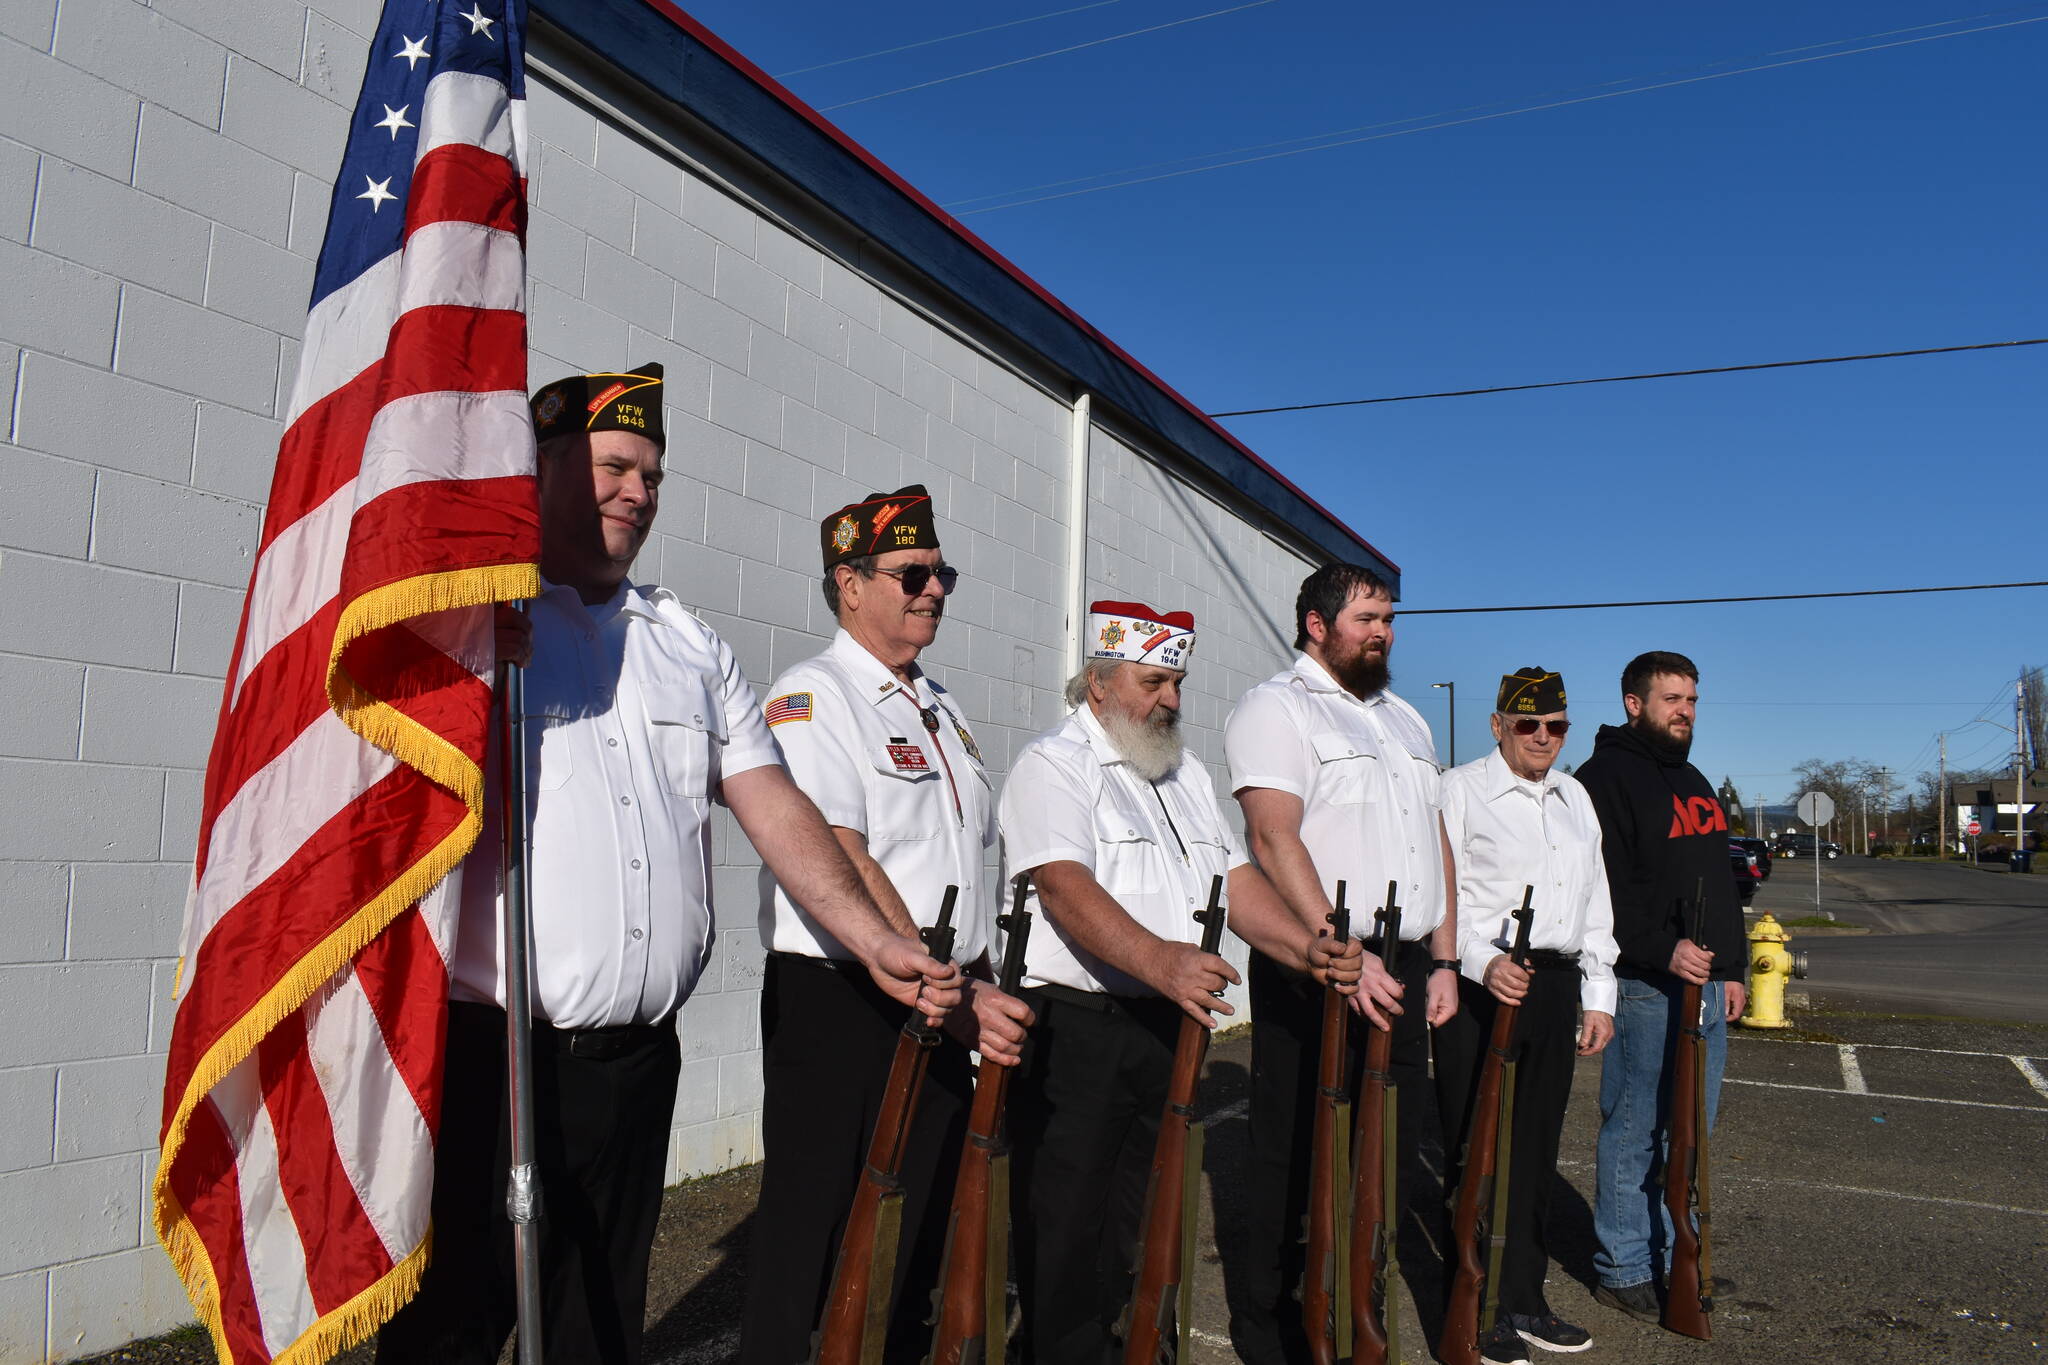 Photos by Matthew N. Wells | The Daily World
Elma VFW Bill Mann Post 1948 members (from left to right) Jim Mears, Tyler Marriott, Bill Wickwire, Cody Fries, Chuck McLane and Brad Dendy line up with an American flag and the seven ceremonial M1 Garand rifles that, once stolen, have since been recovered.